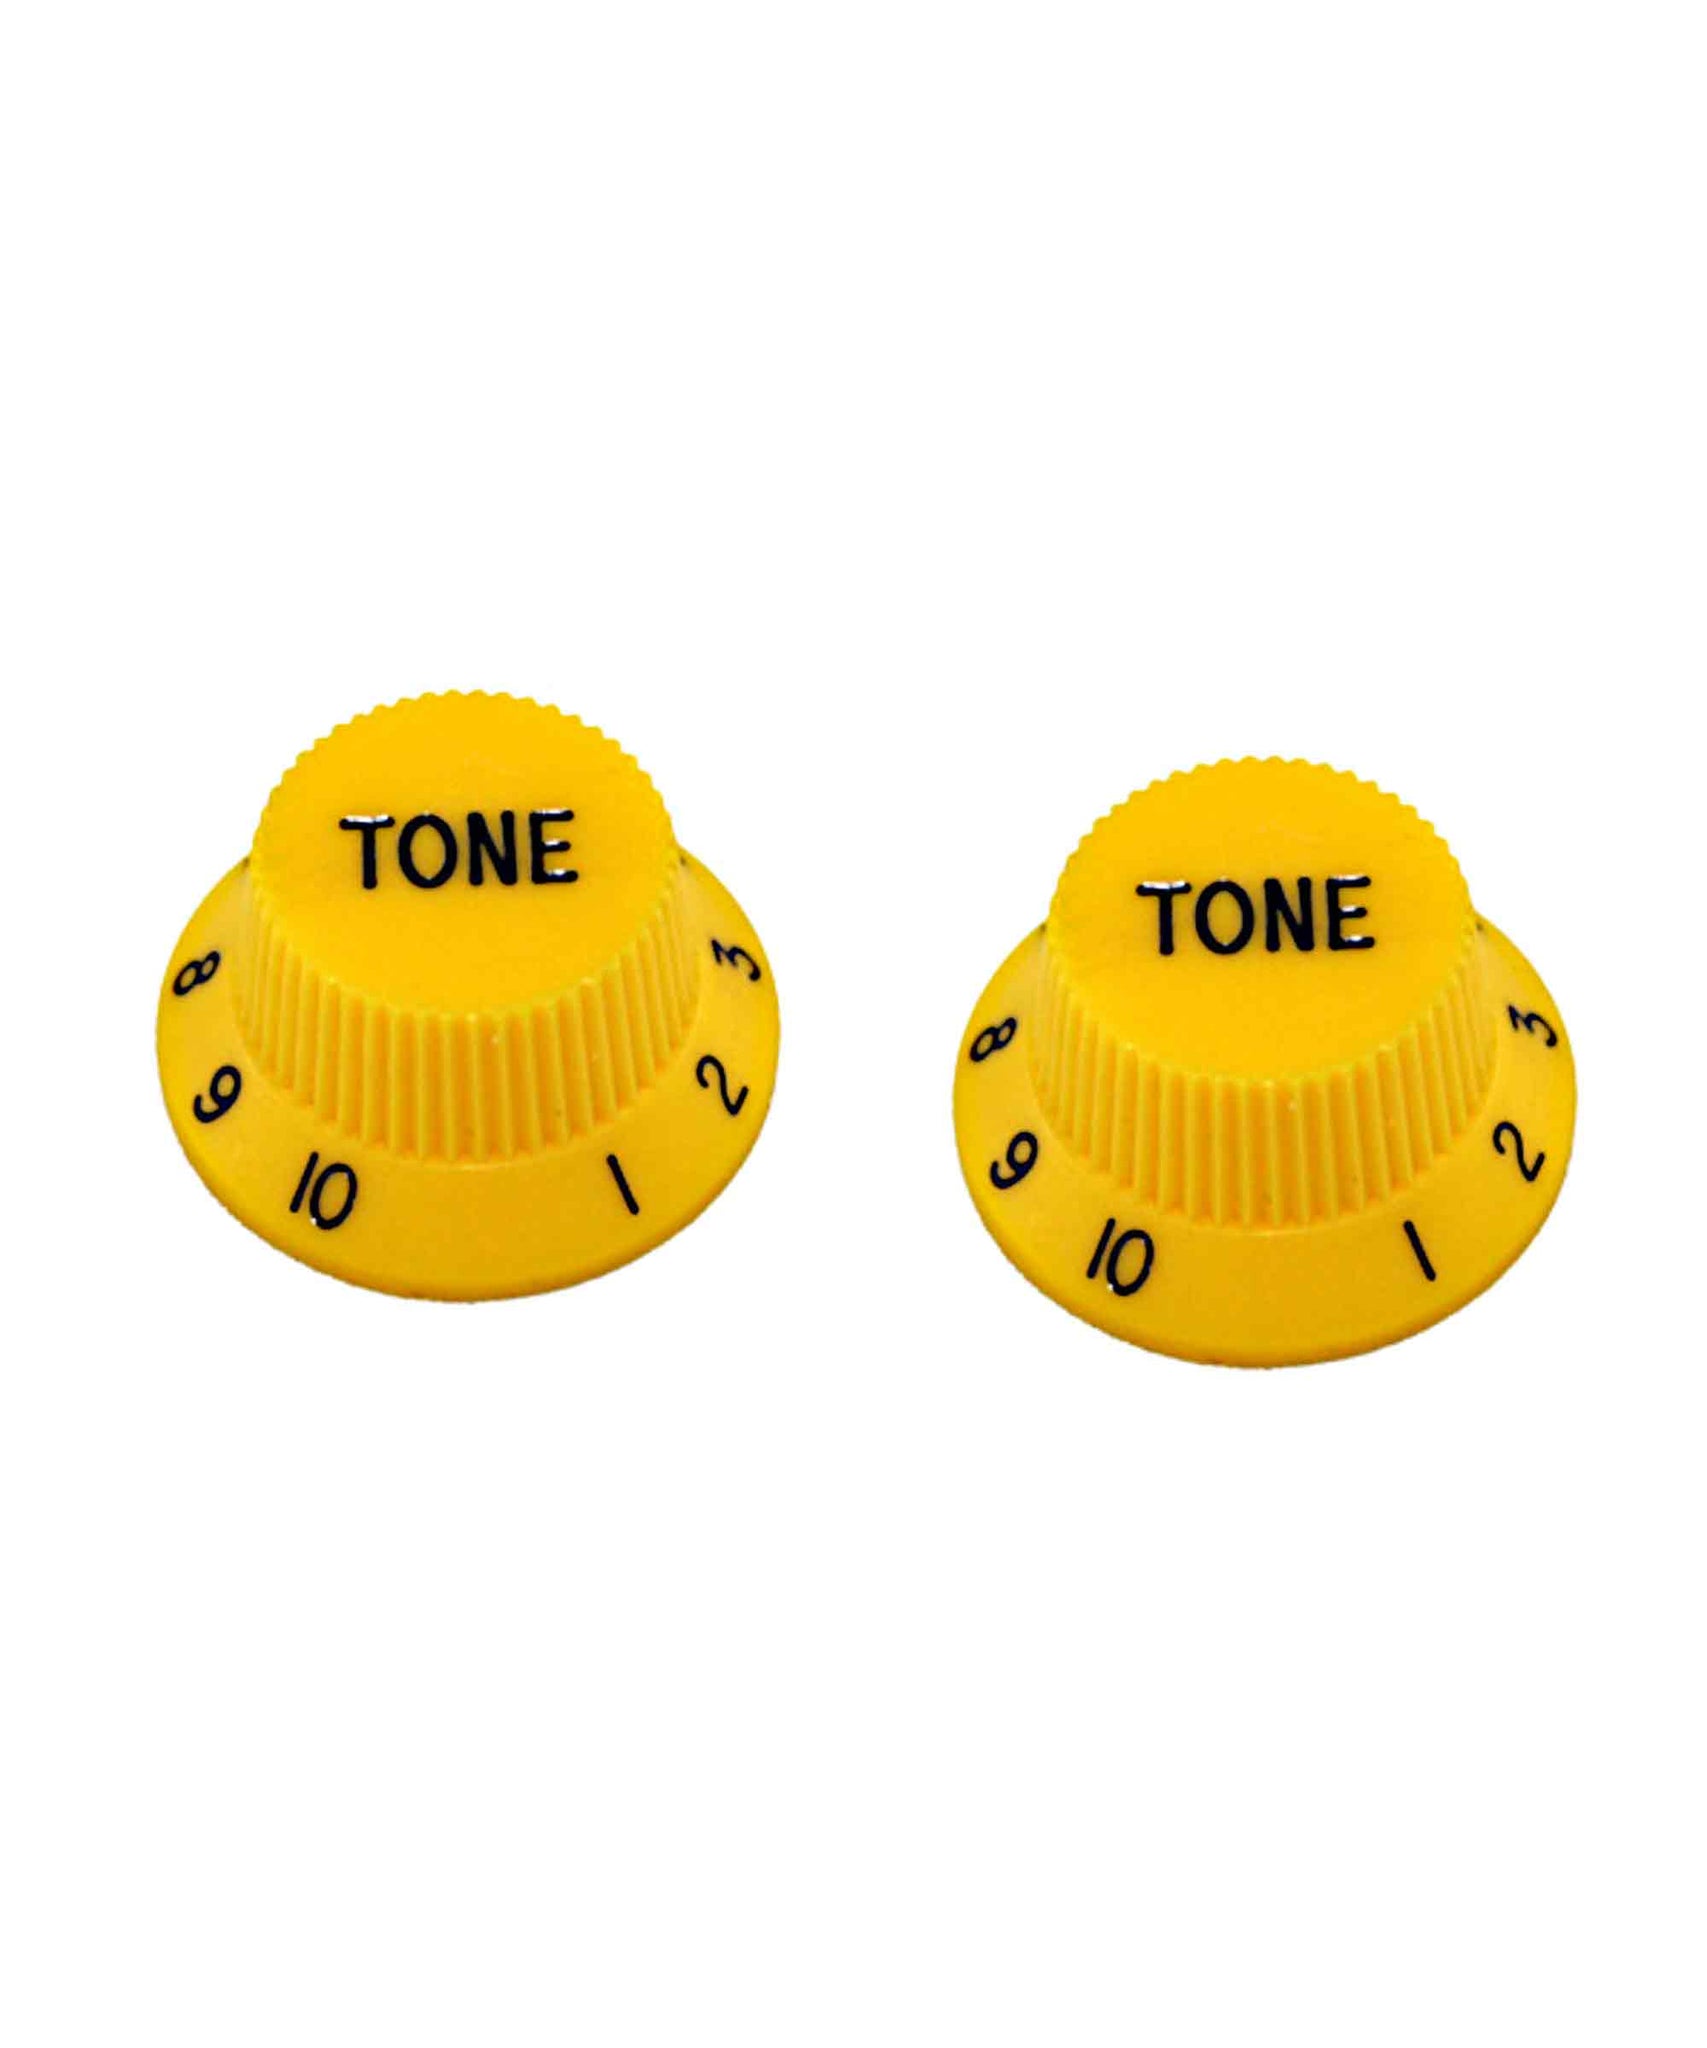 All Parts - Set of 2 Plastic Tone Knobs for Stratocaster